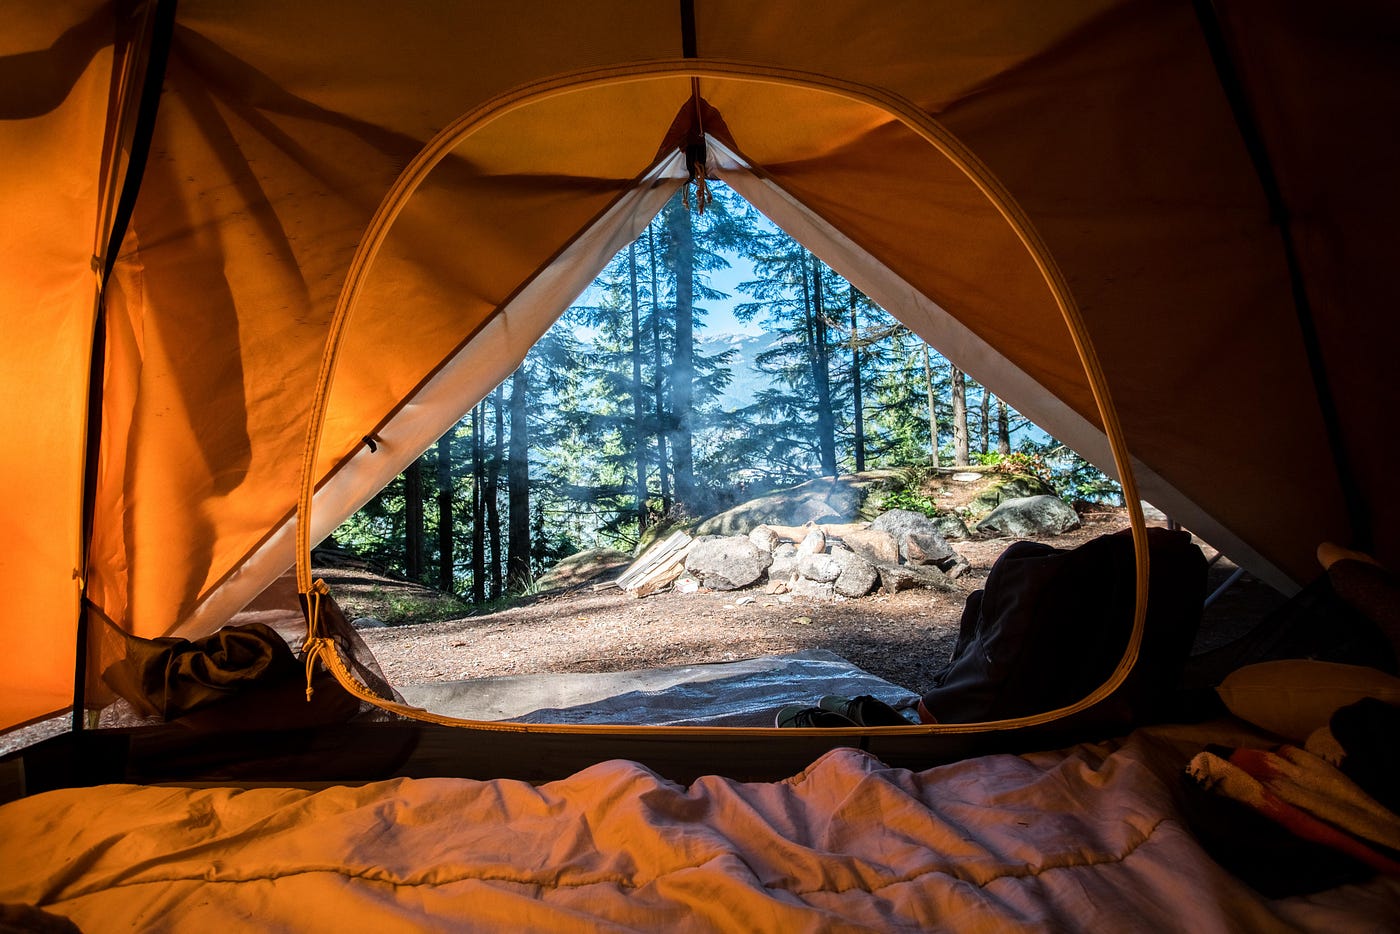 How To Insulate a Tent for Winter Camping - Camping World Blog